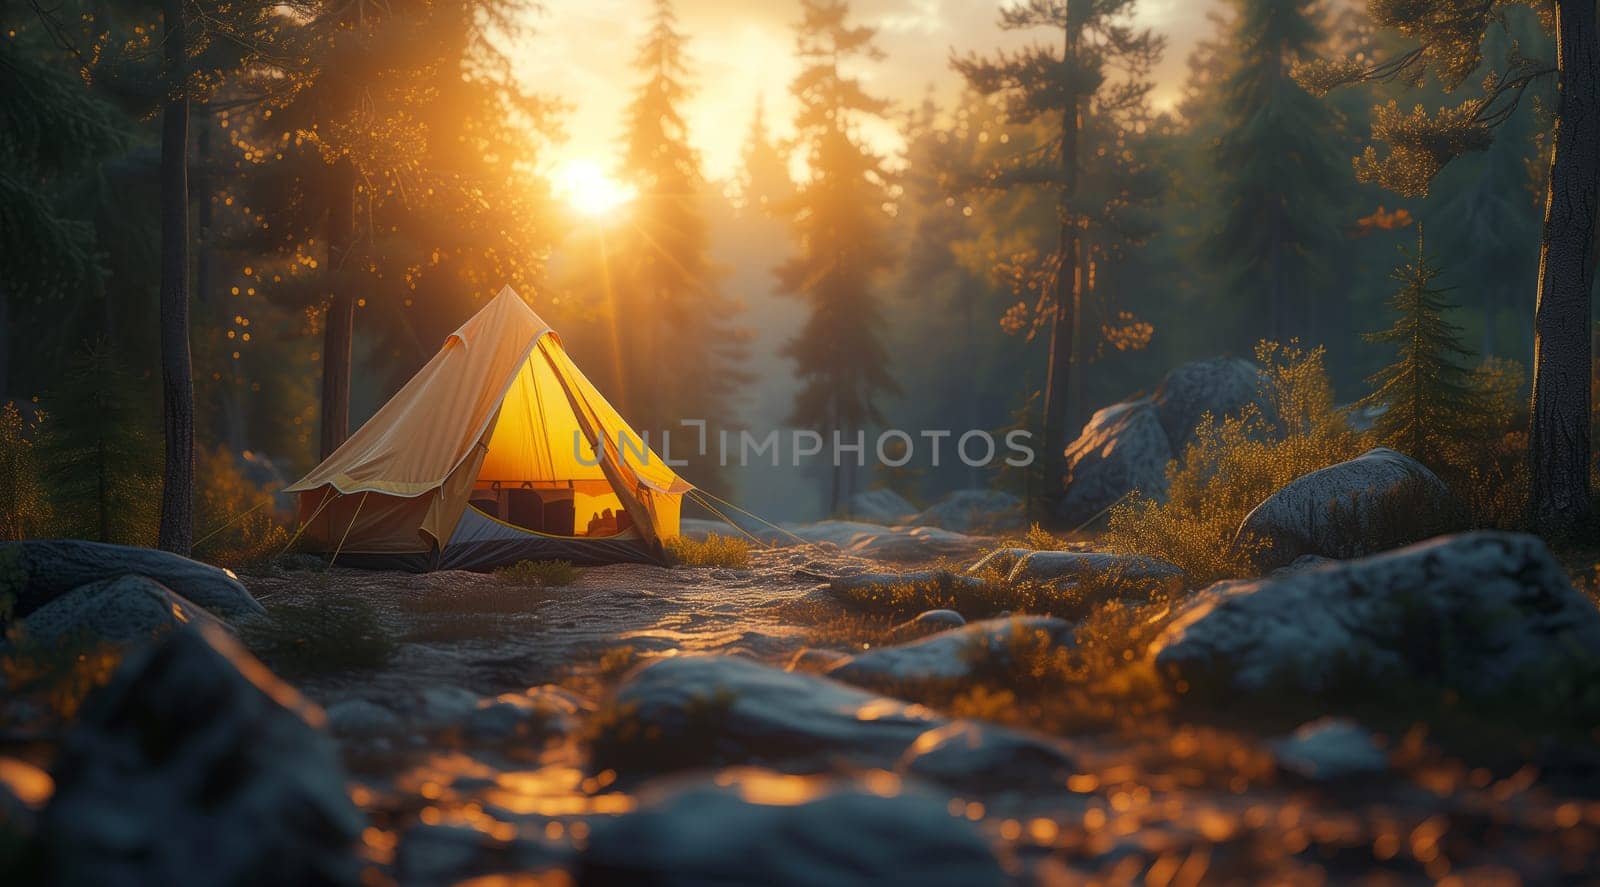 A tent is nestled in the heart of a forest as the sun sets, creating a serene atmosphere amidst the lush natural landscape of wood, trees, and grass